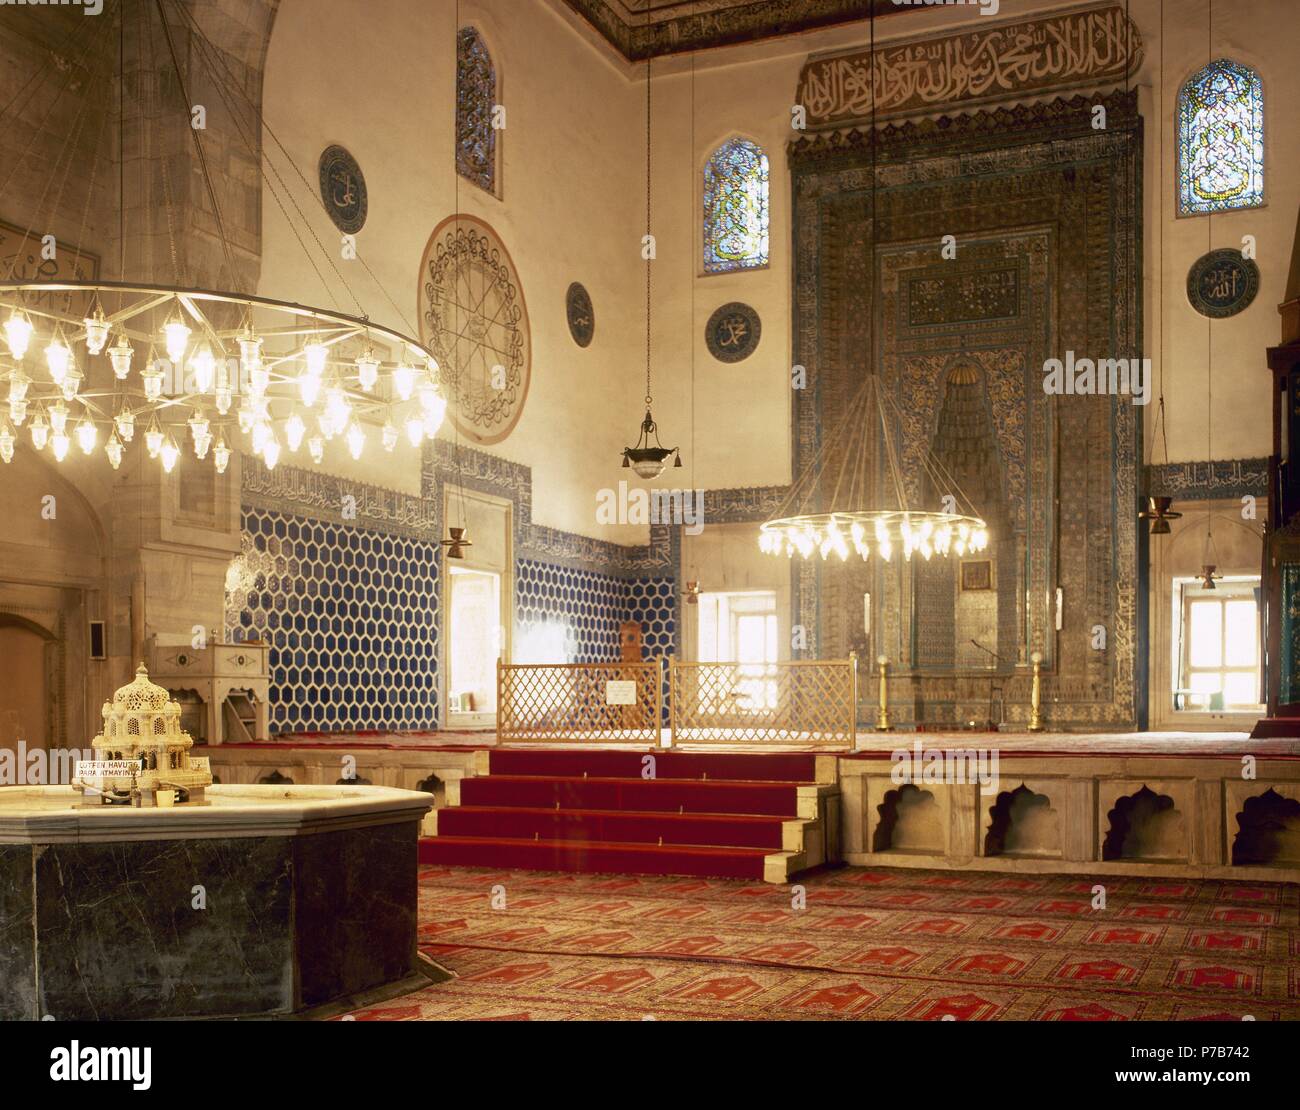 Turkey. Bursa. Green Mosque. Built by Haci Ivaz Pasha between 1419-1421 and renovated in the 19th century. View of the Prayer Room with the mihrab. Stock Photo